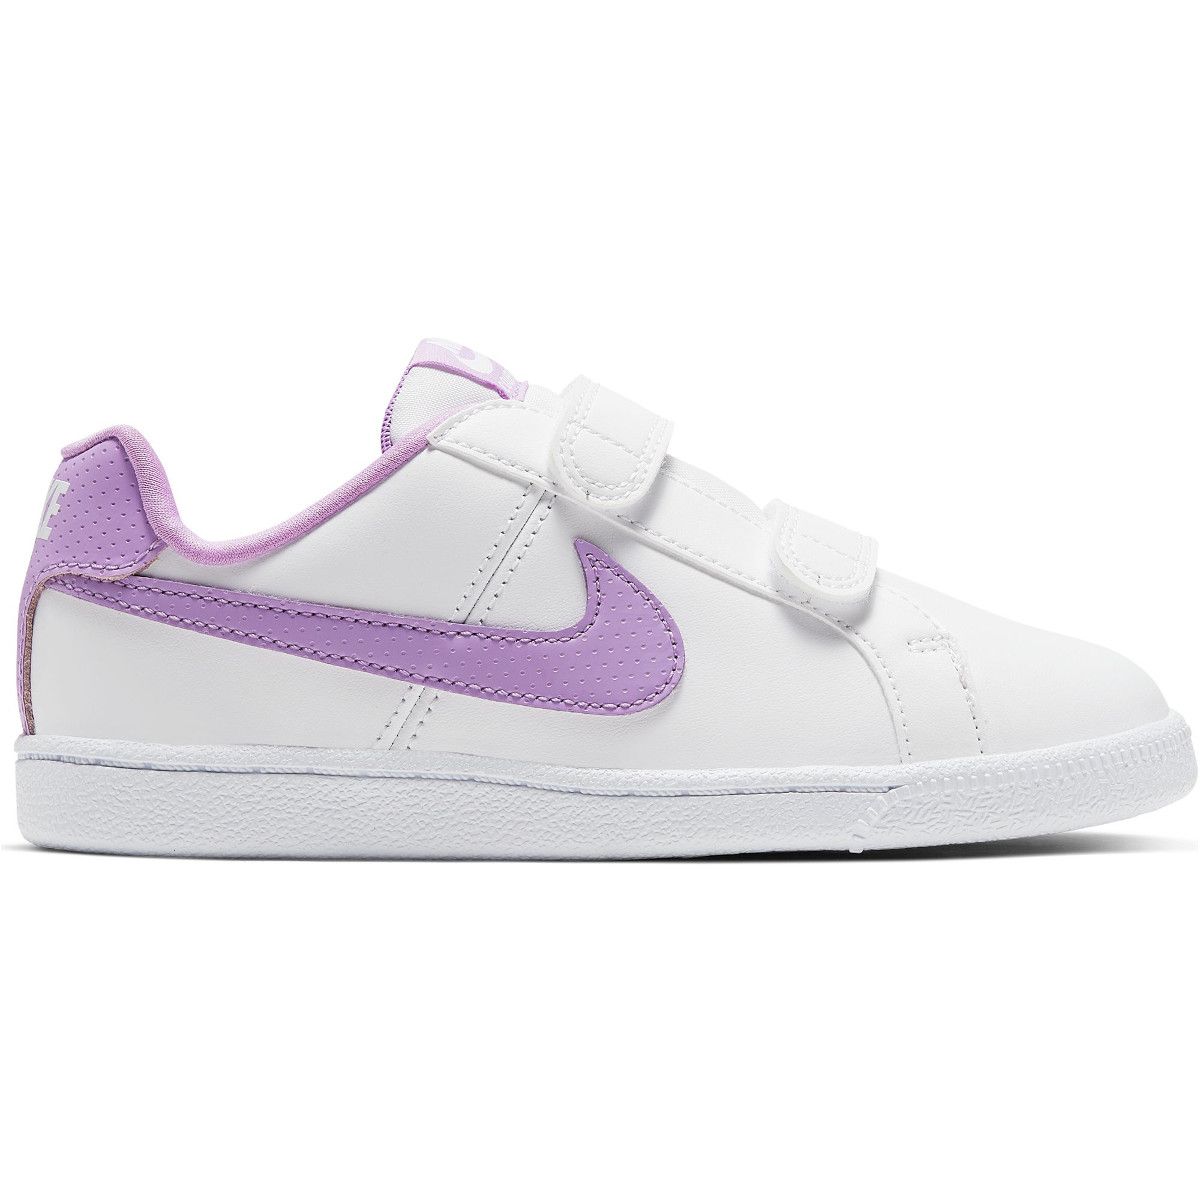 Nike Court Royale Pre-School Girl's Shoes (PS) 833655-103